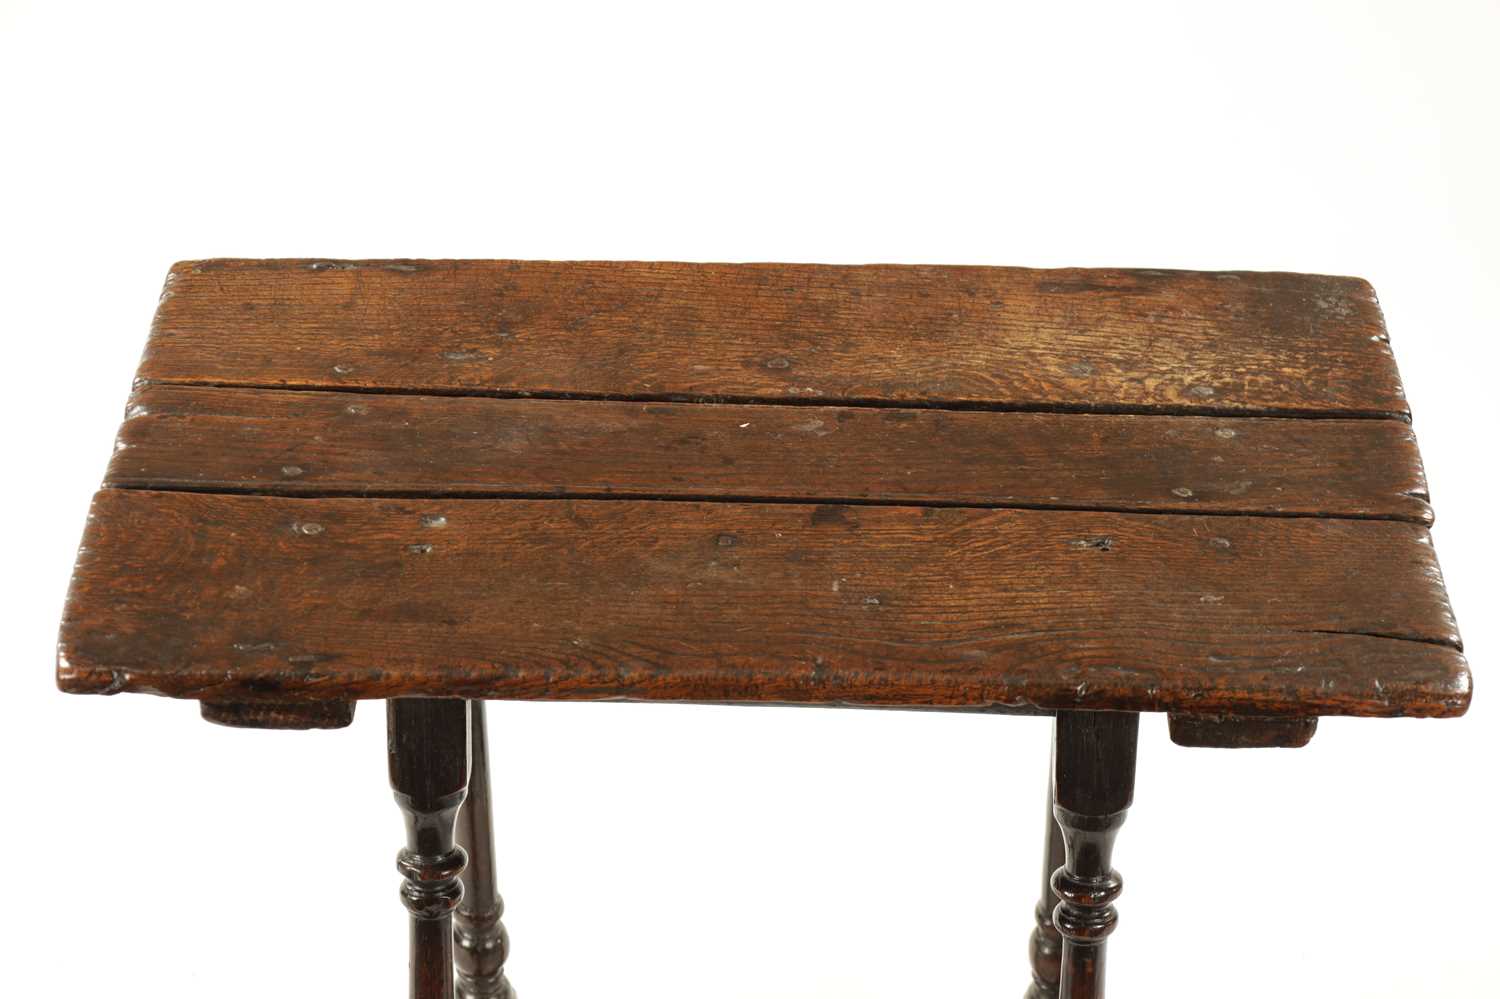 A LATE 17TH CENTURY OAK RECTANGULAR SMALL TABLE - Image 4 of 6